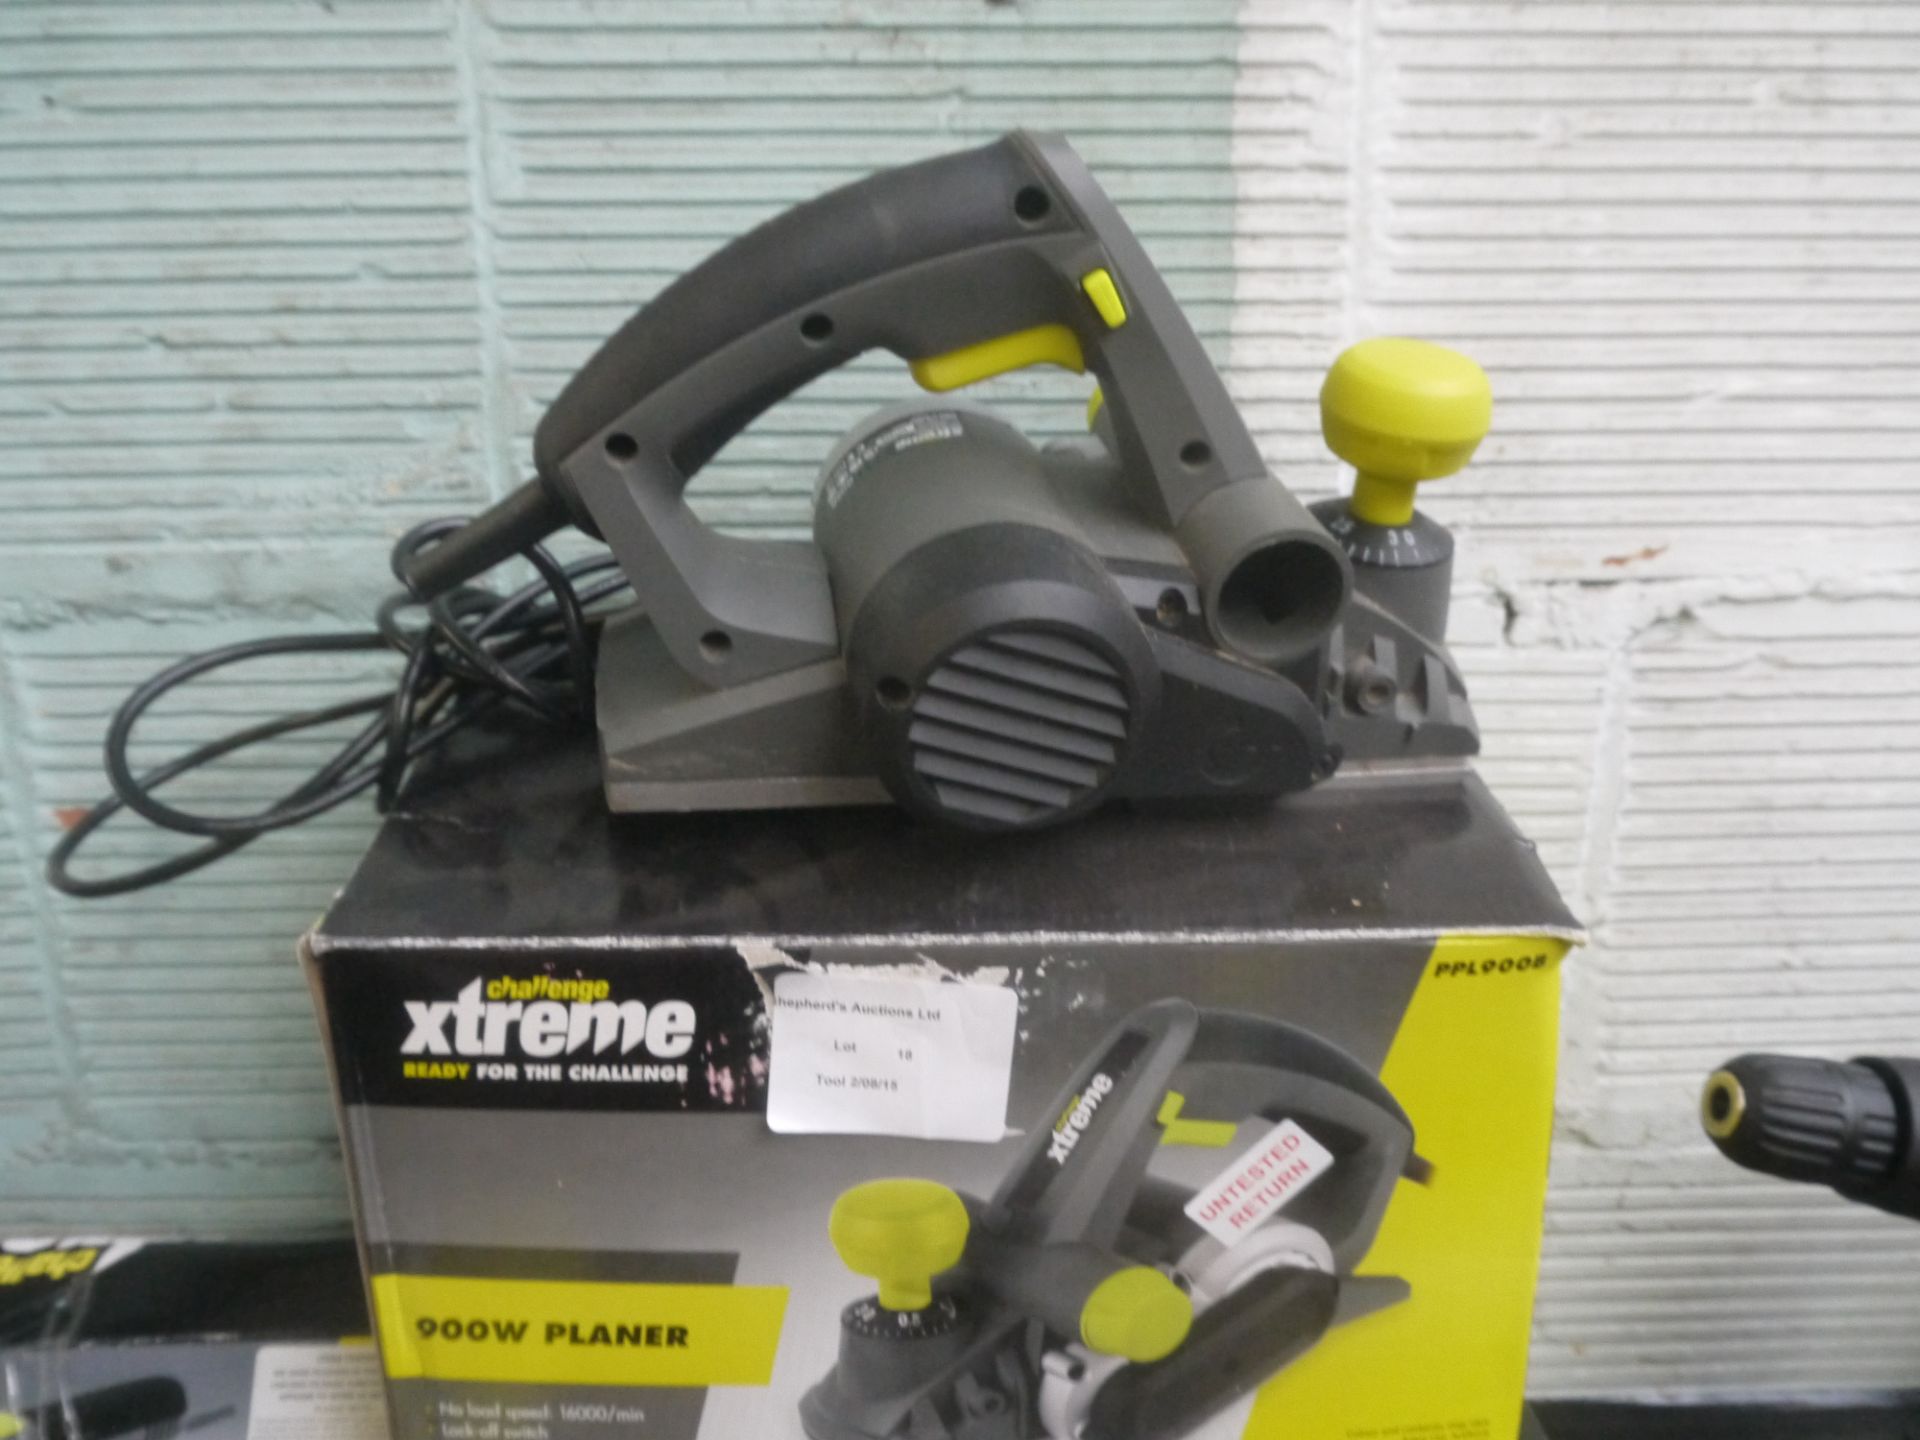 Challenge Xtreme 900W Planer. Powers up, boxed.